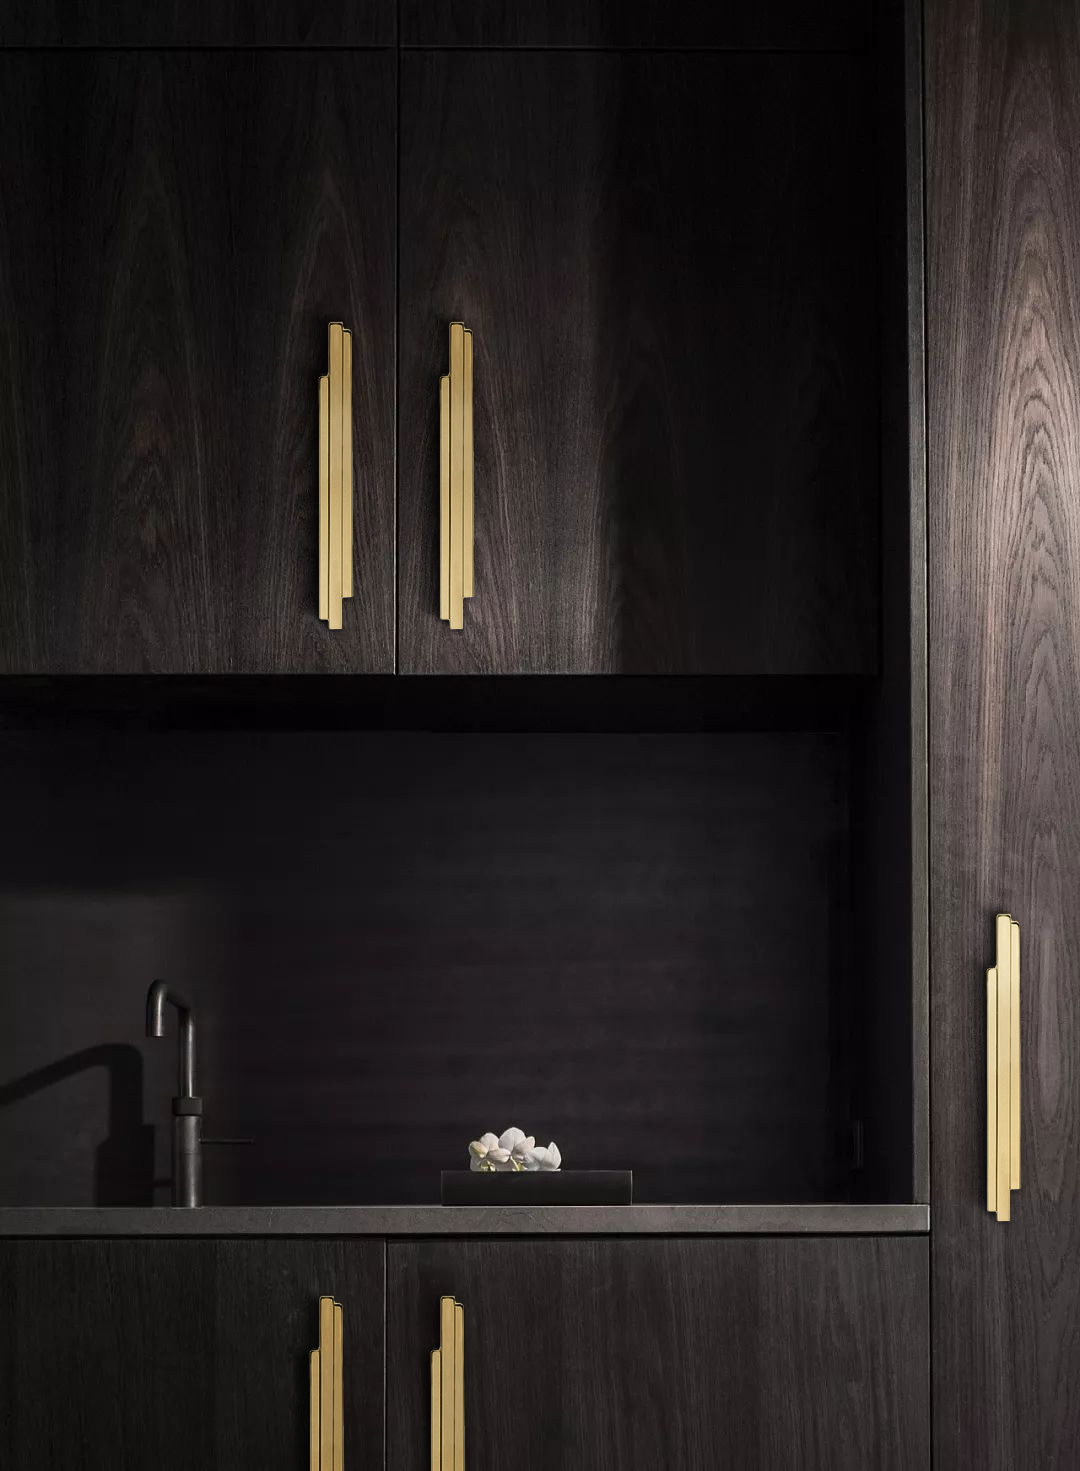 Sleek Kitchen design comlemented with the Skyline Cabinet Handles from PullCasgt